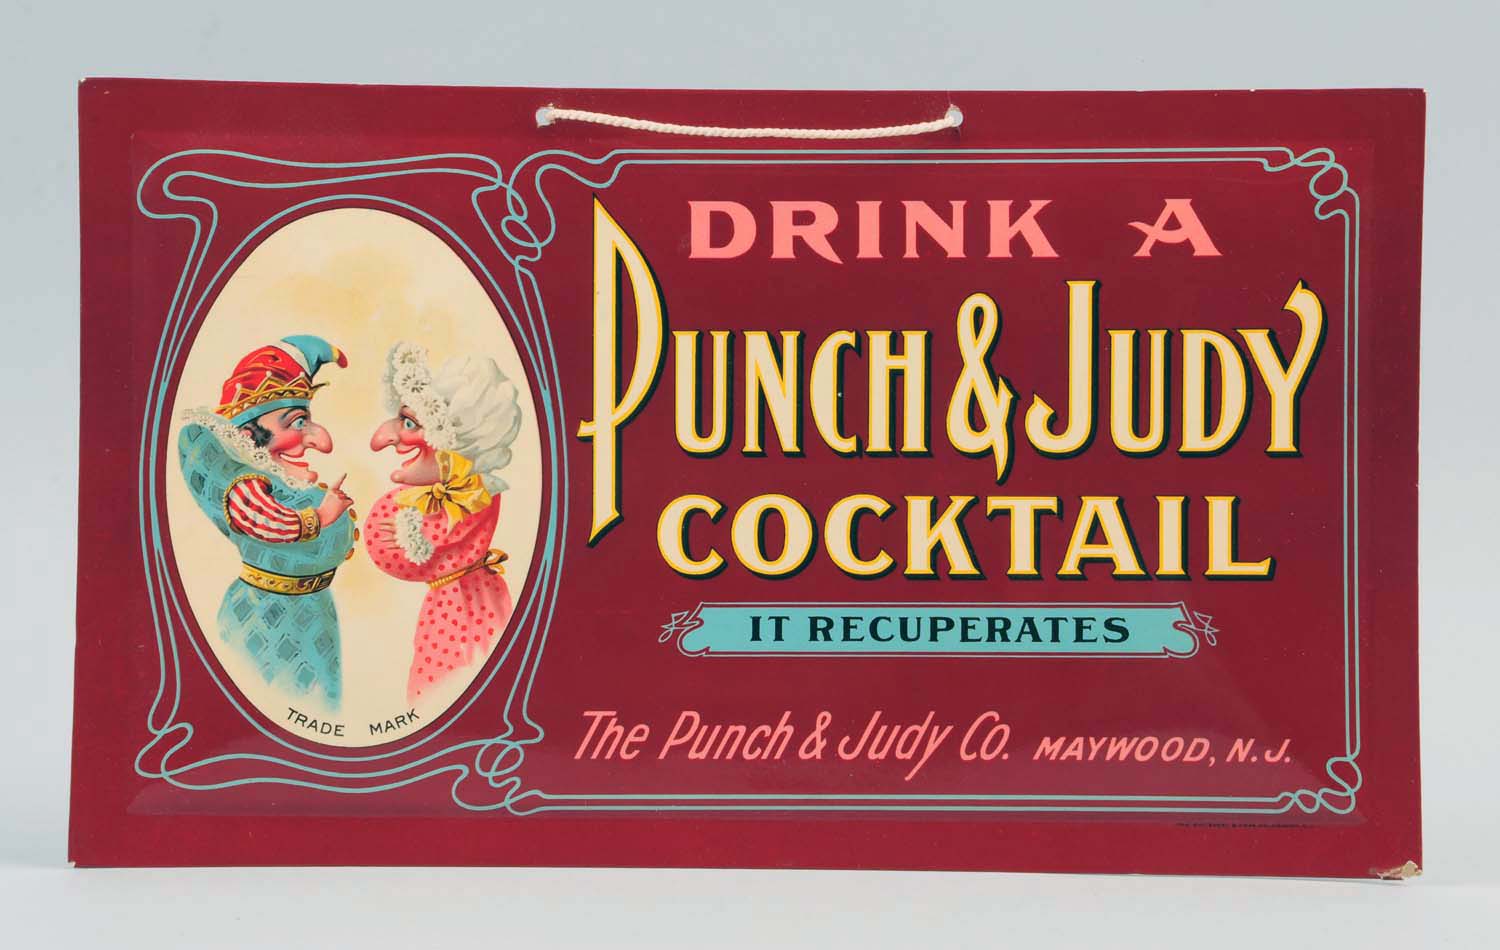 Circa-1910 Punch & Judy Cocktail celluloid-over-cardboard sign, 12 x 7 inches, est. $800-$1,200. Morphy Auctions image